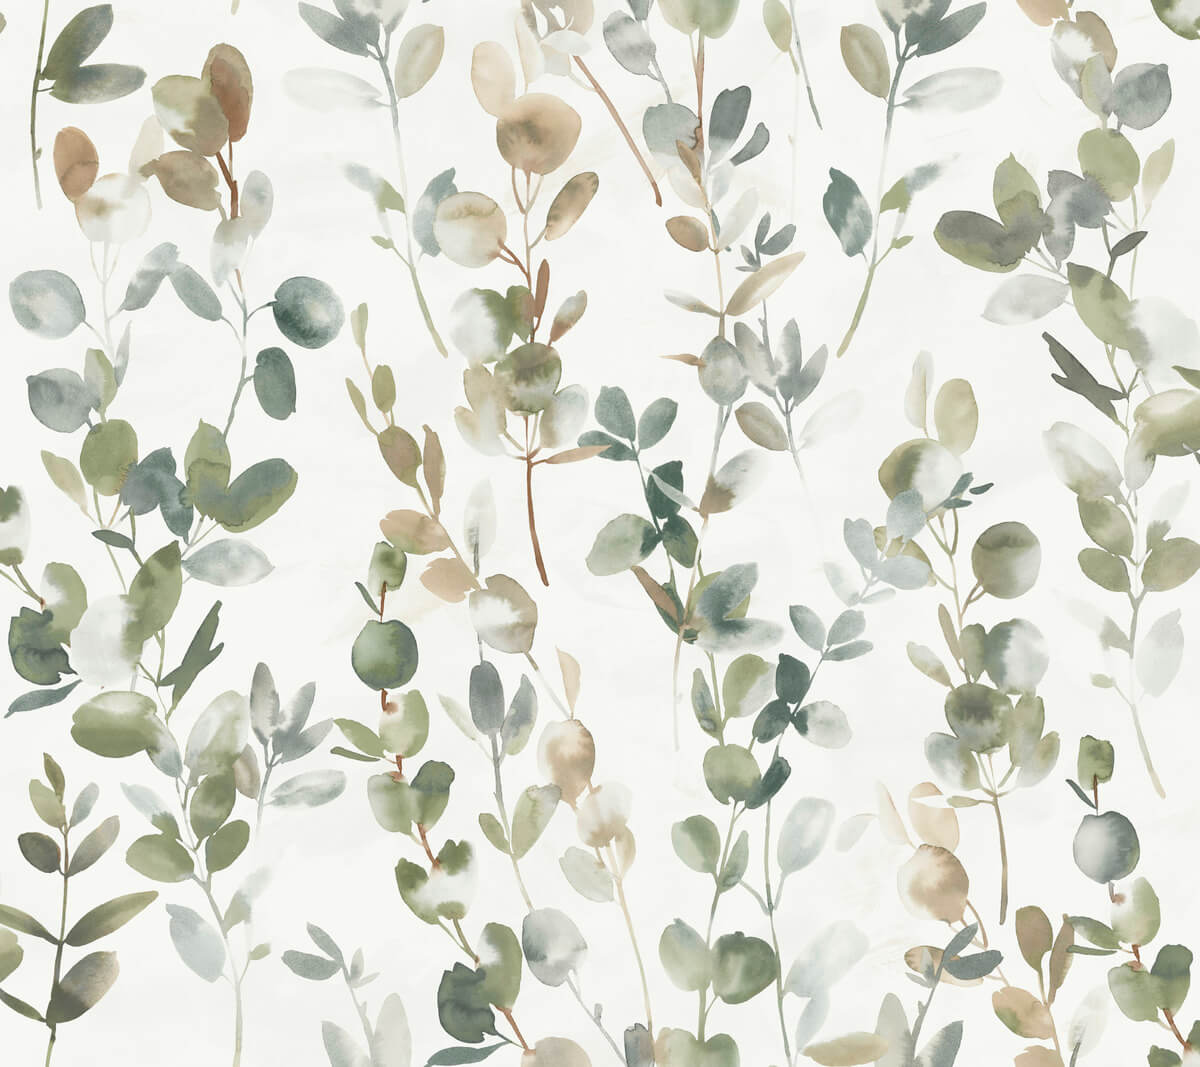 Candice Olson Modern Nature Second Edition Wallpaper Collection - SAMPLE